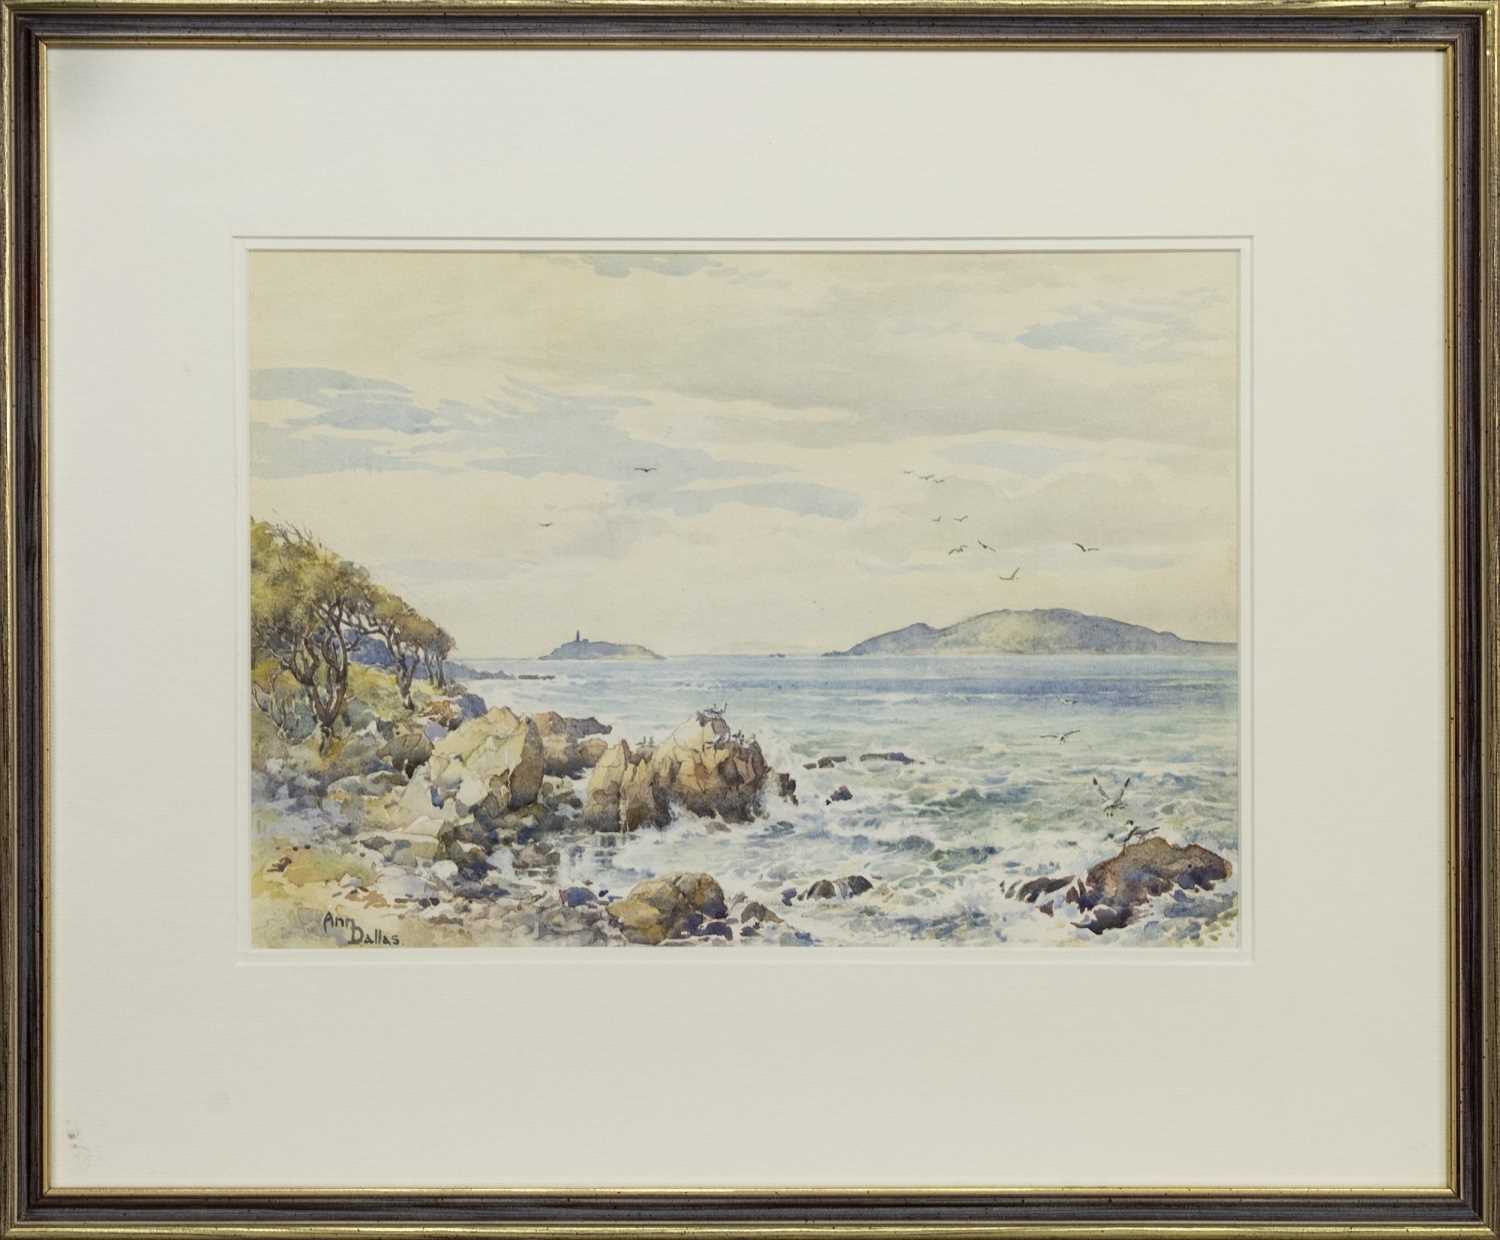 Lot 7 - ROSS ISLAND AND THE DEE ESTUARY, A WATERCOLOUR BY ANN DALLAS